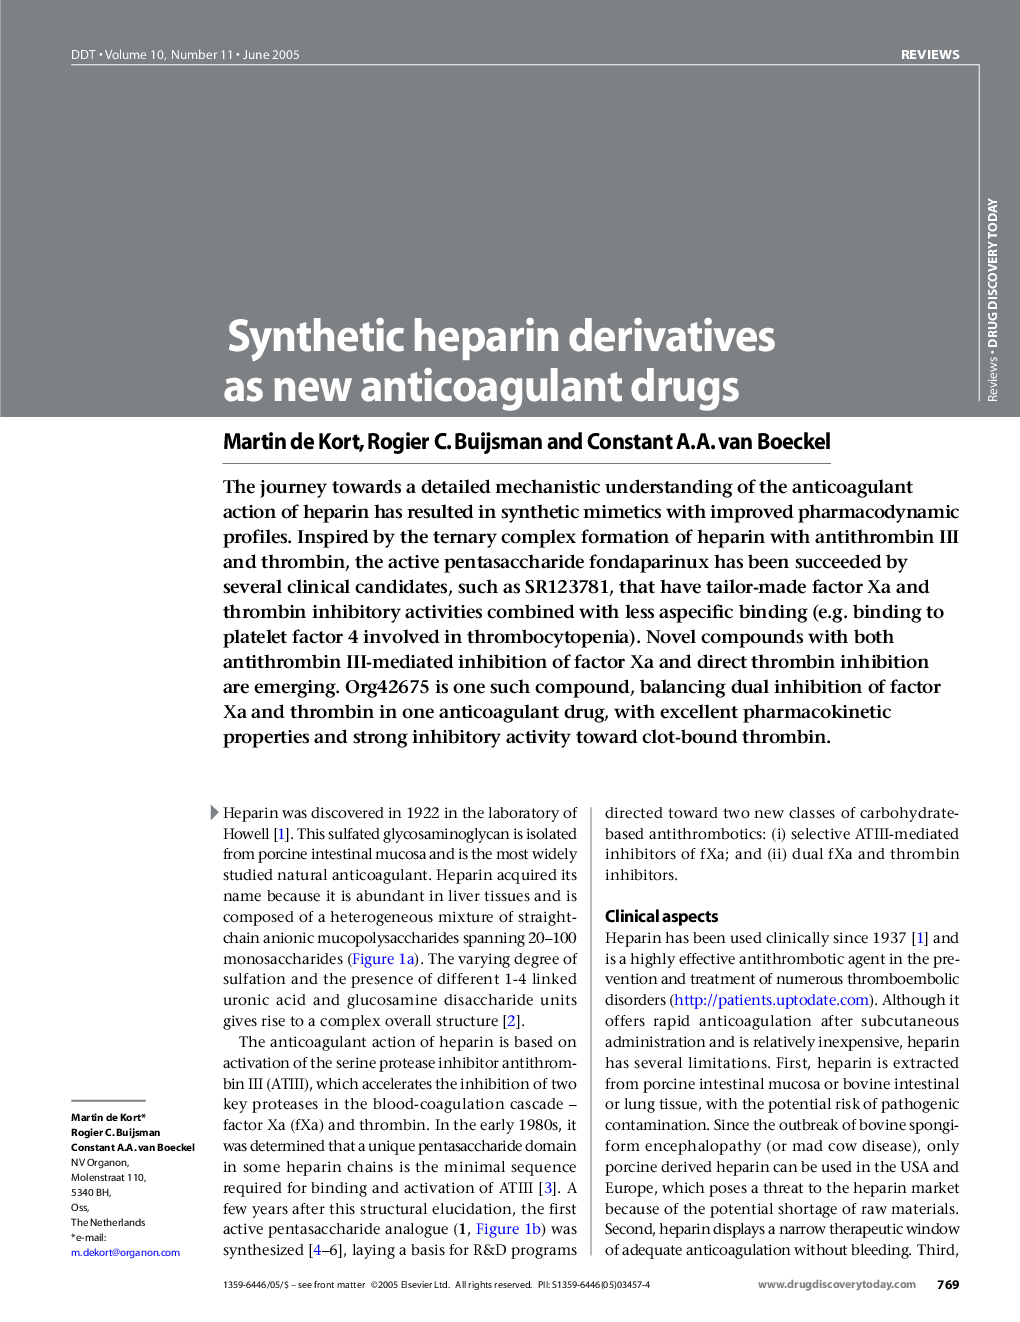 Synthetic heparin derivatives as new anticoagulant drugs